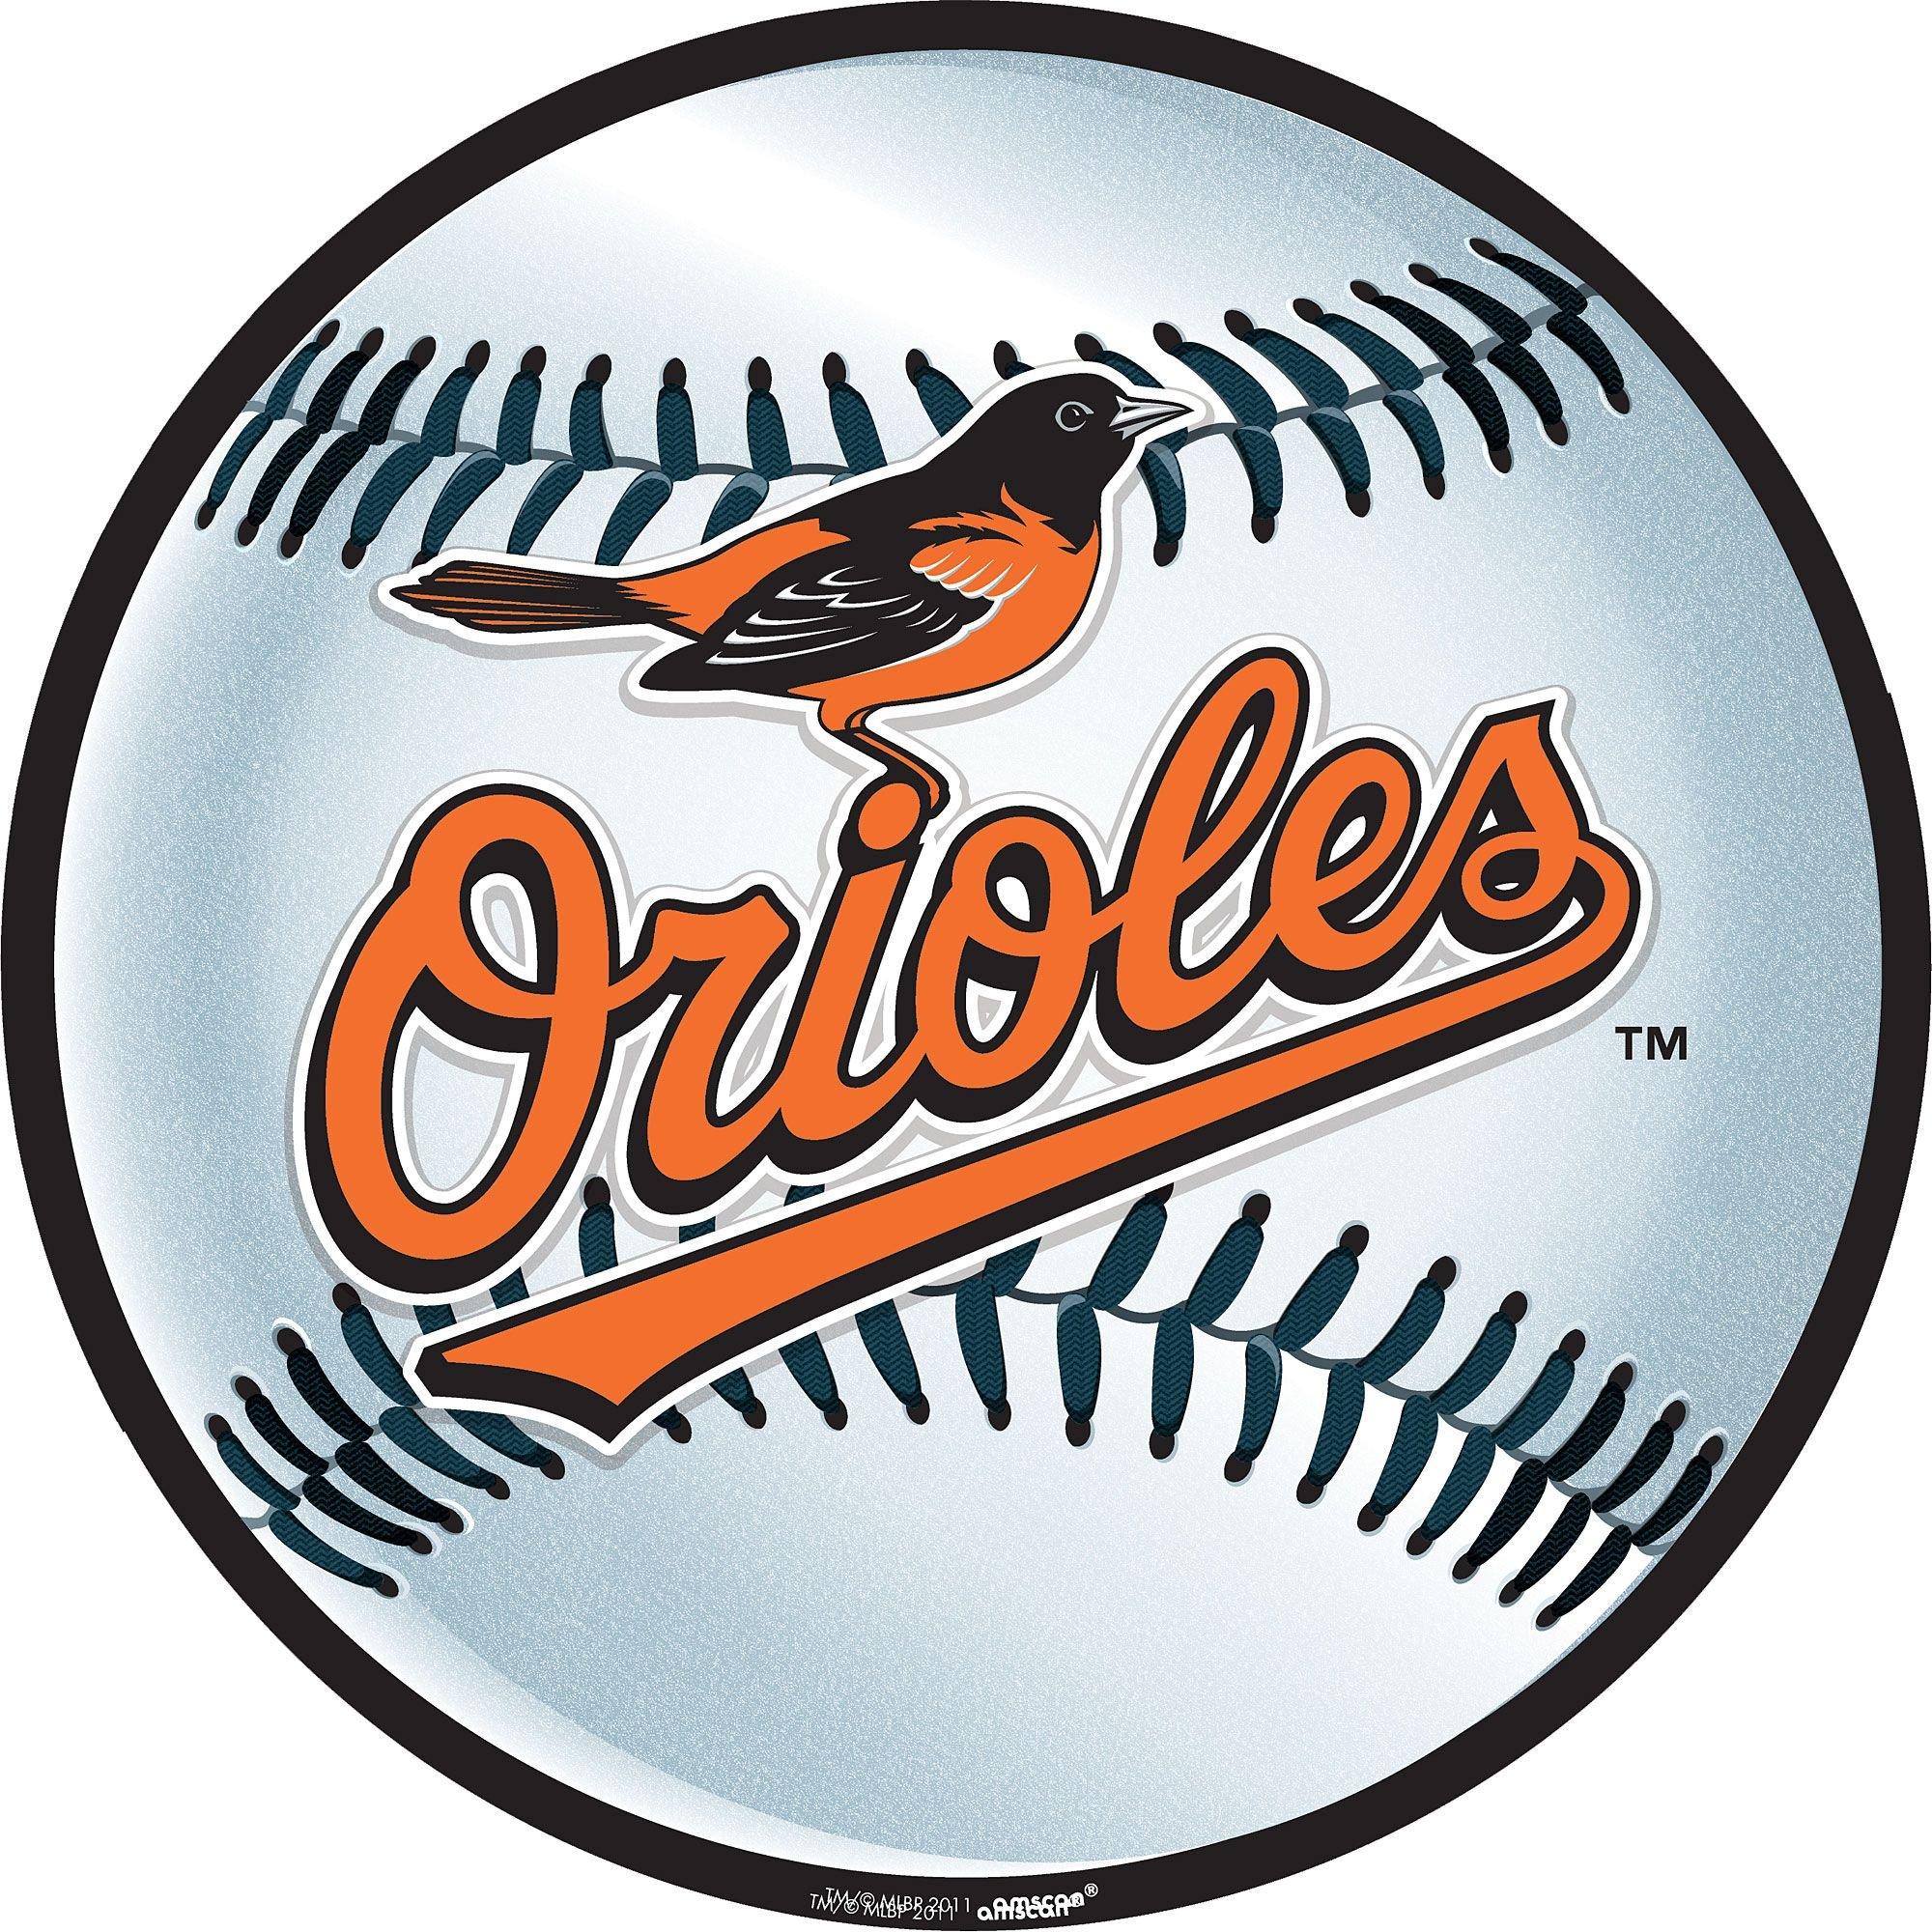 Orioles have changed the game, Baltimore Orioles, party